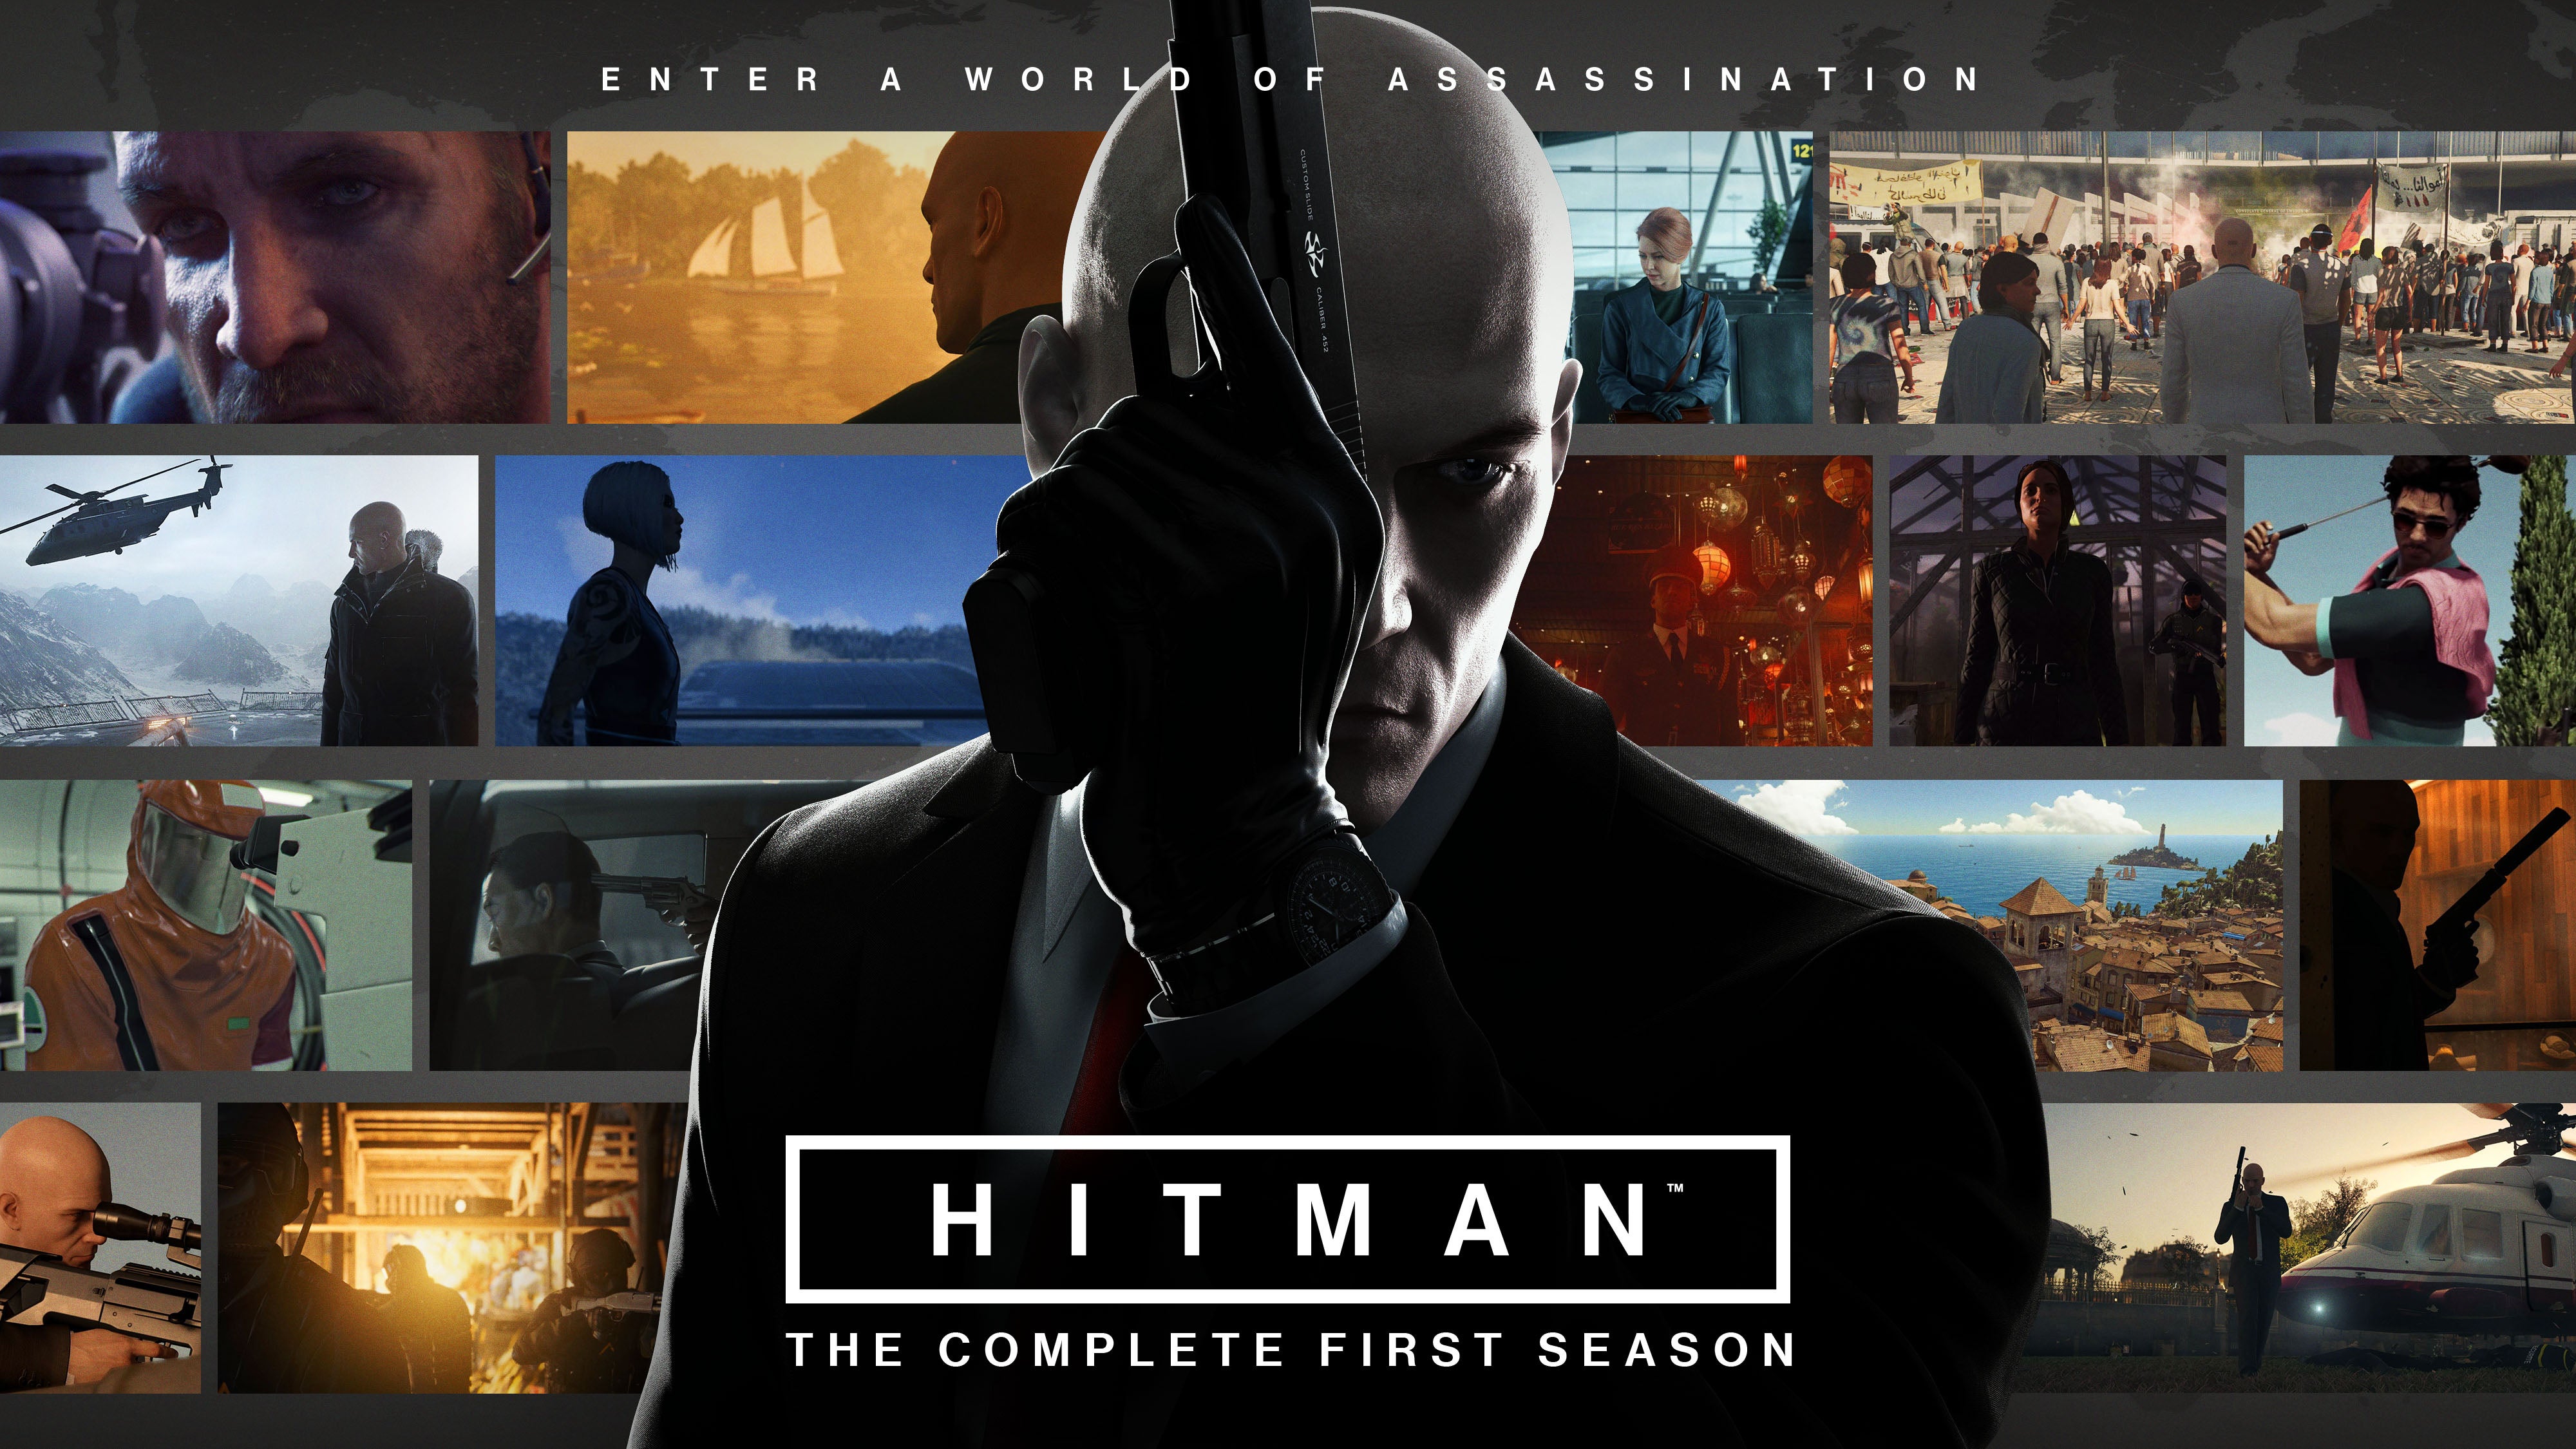 Image for This week's best gaming deals: Hitman, Bayonetta, cheapest Steam Link ever, and more